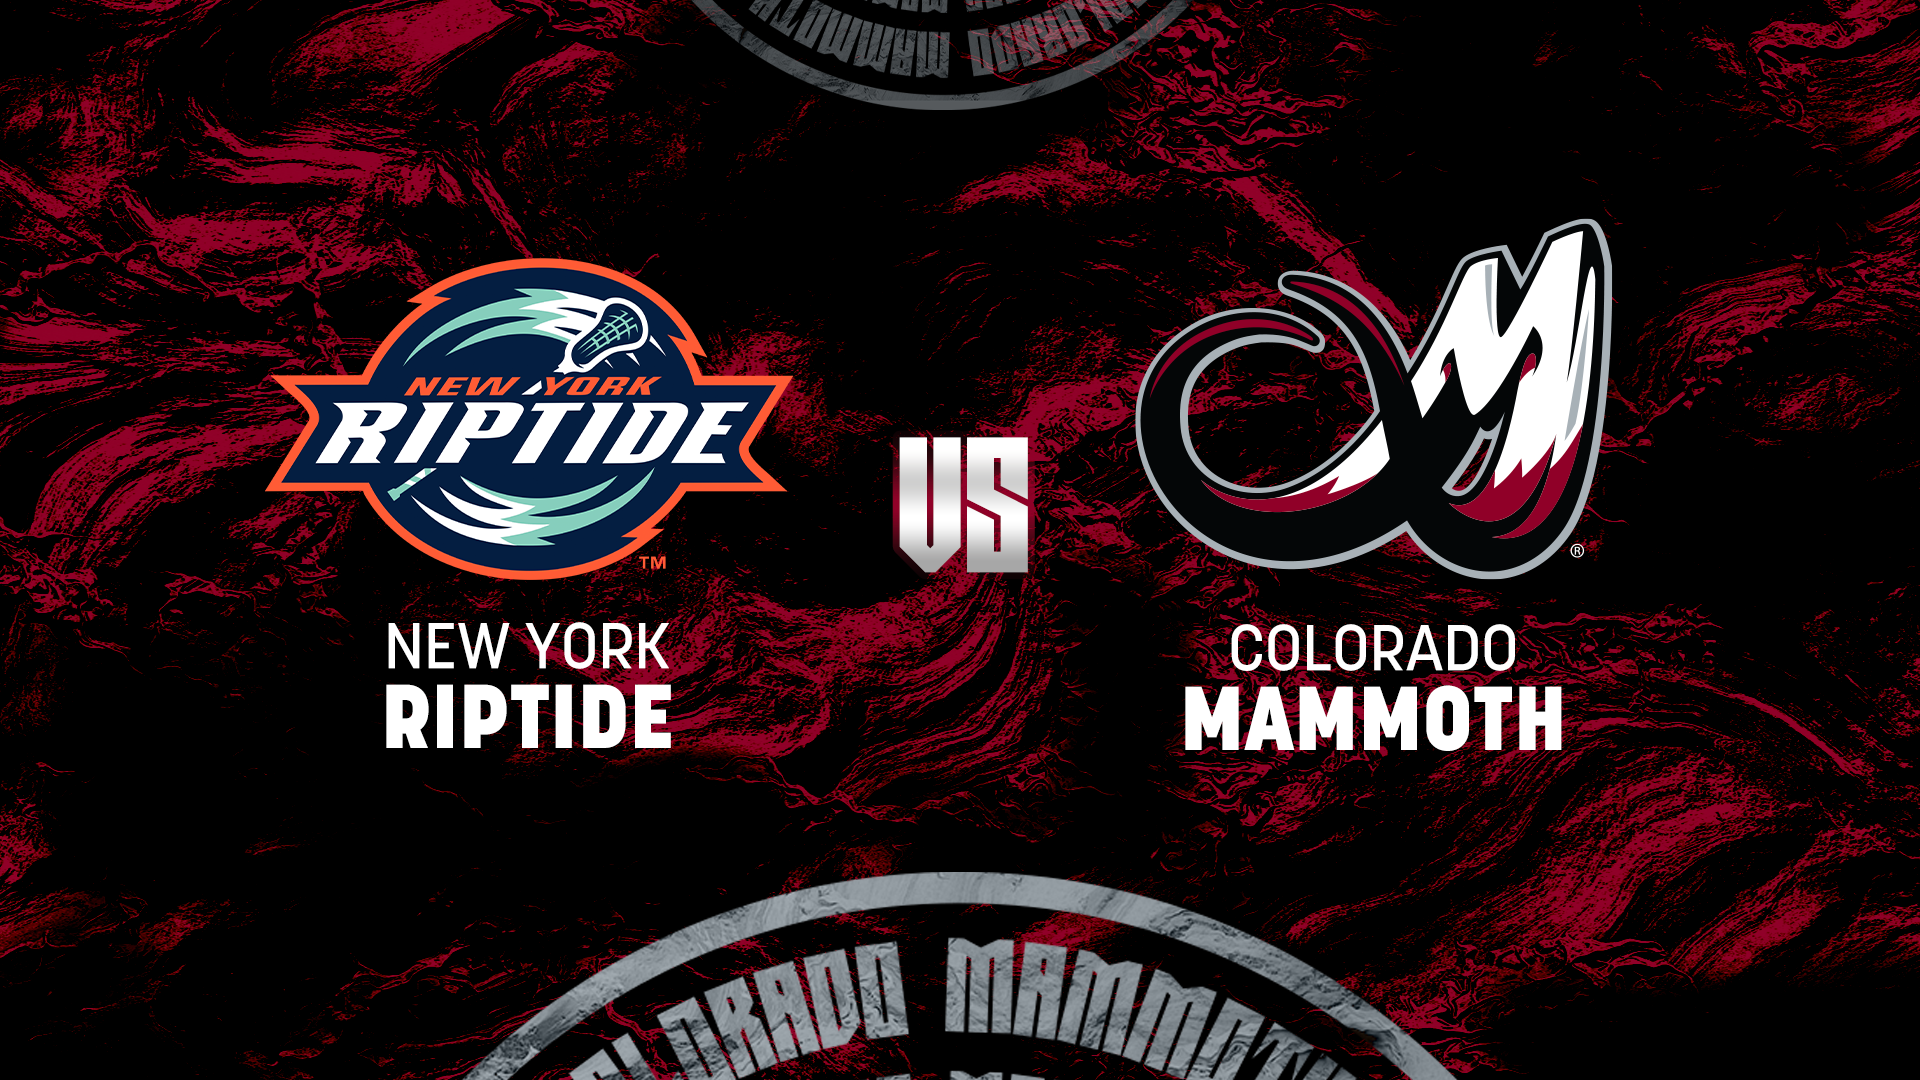 Riptide vs. Mammoth matchup graphic